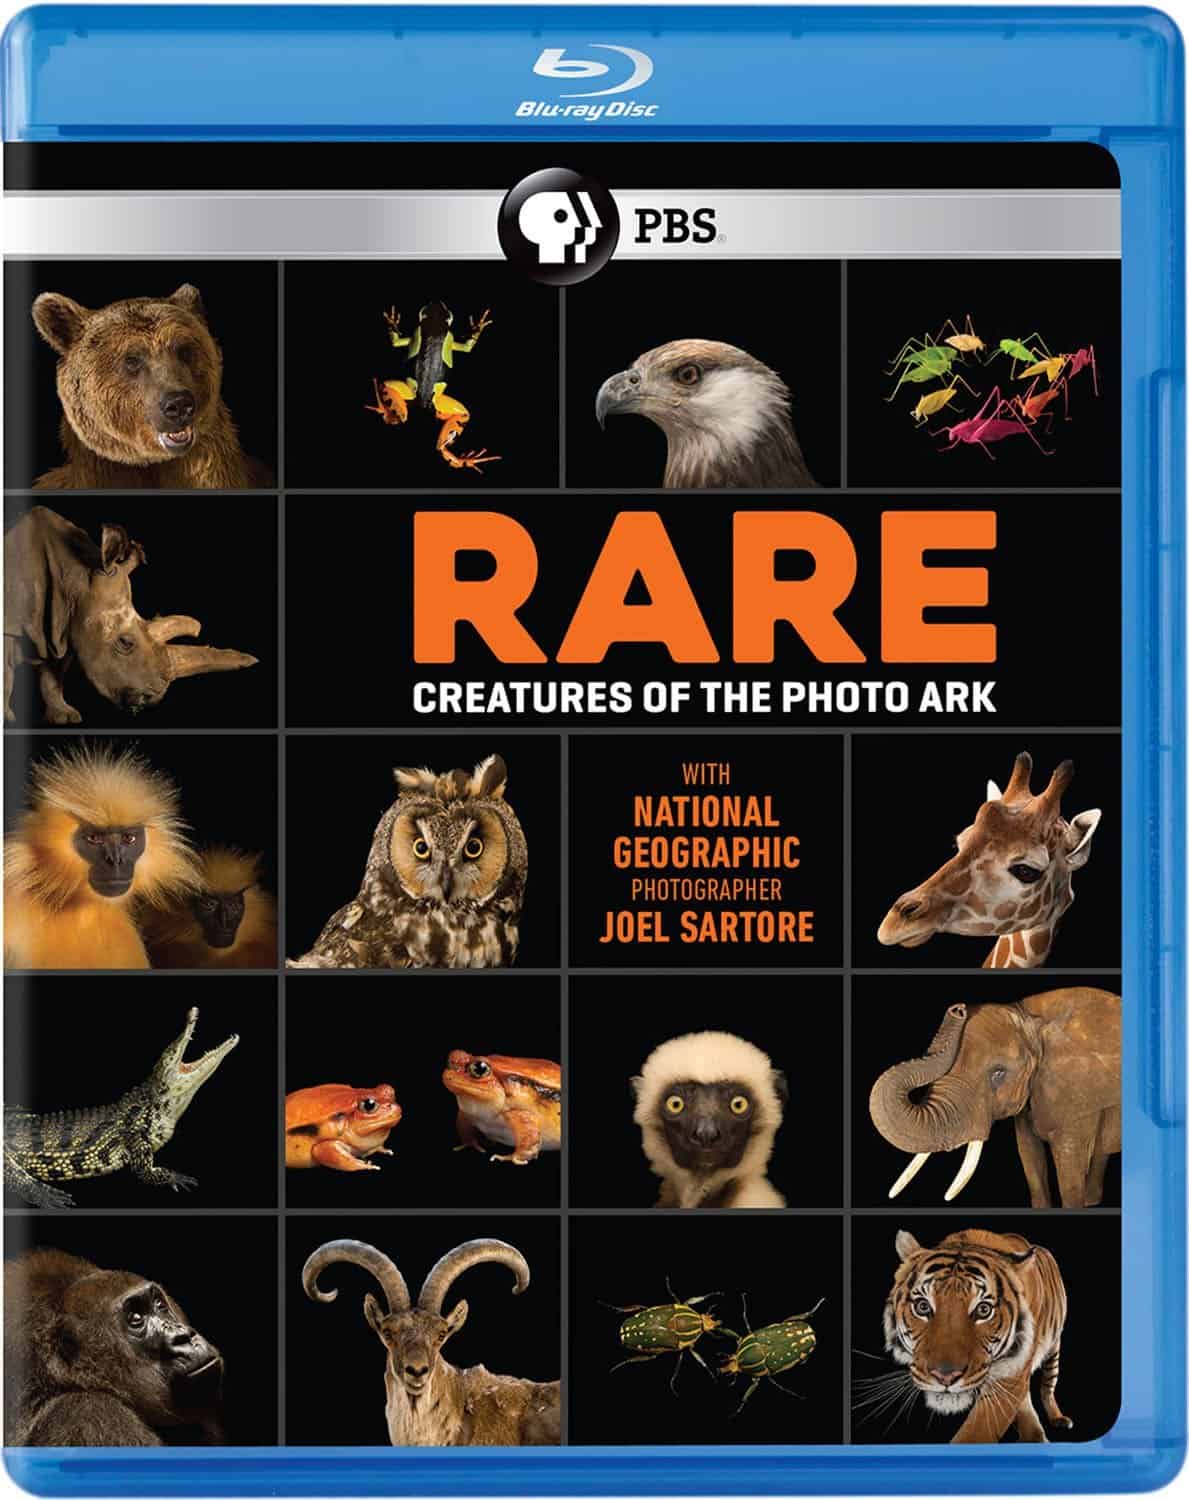 Rare Creatures of the Photo Ark by PBS